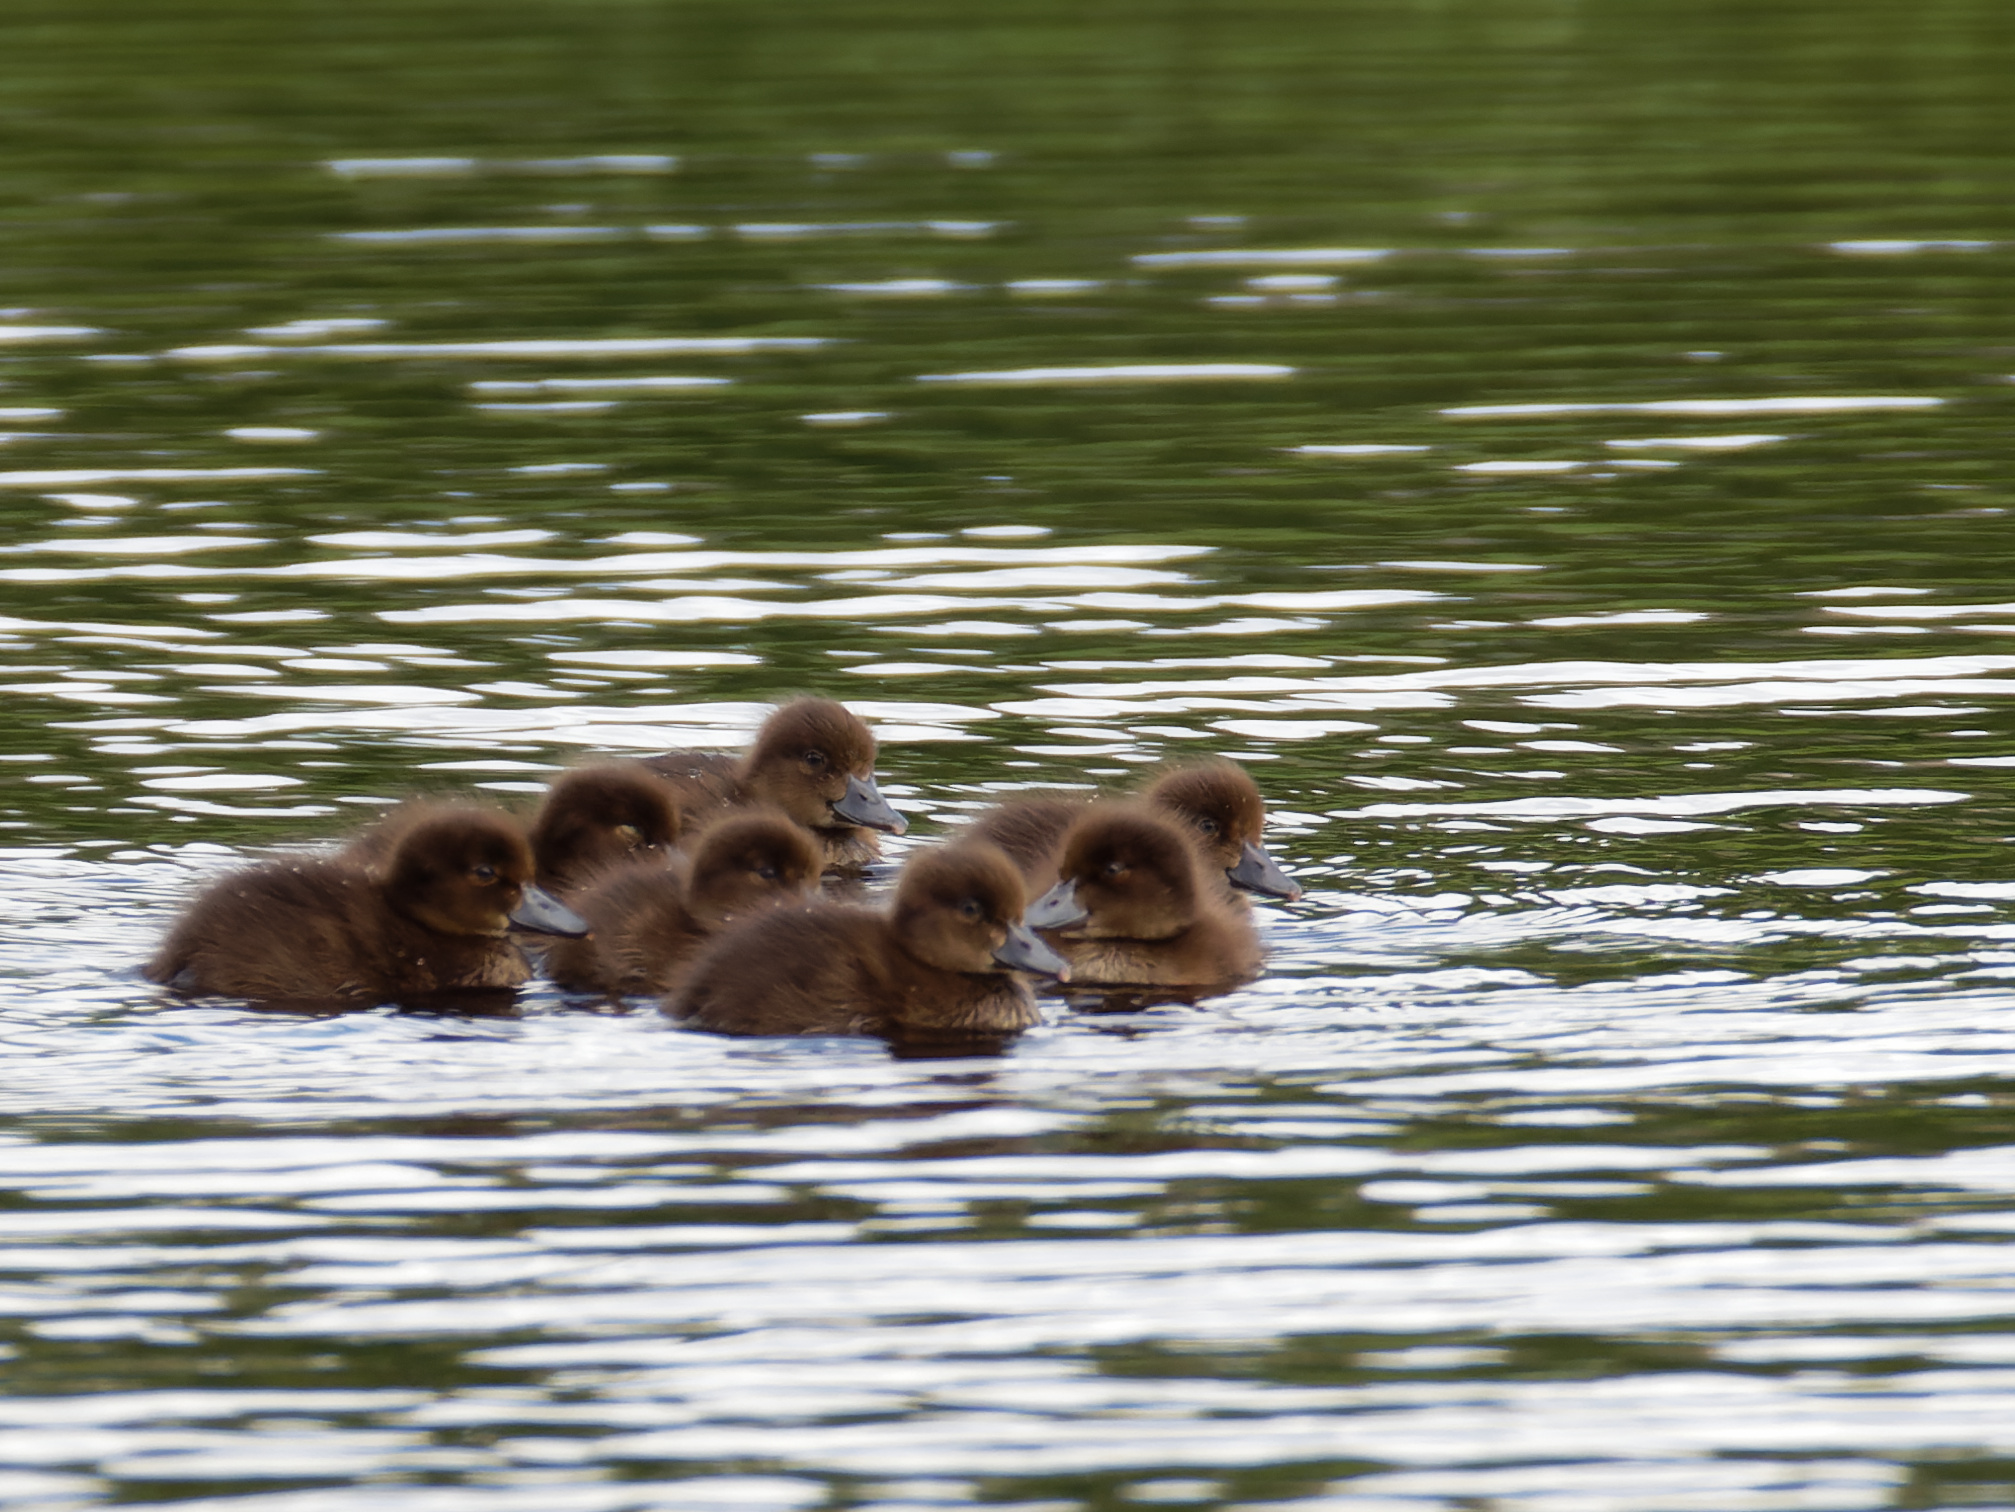 Tufted ducklings